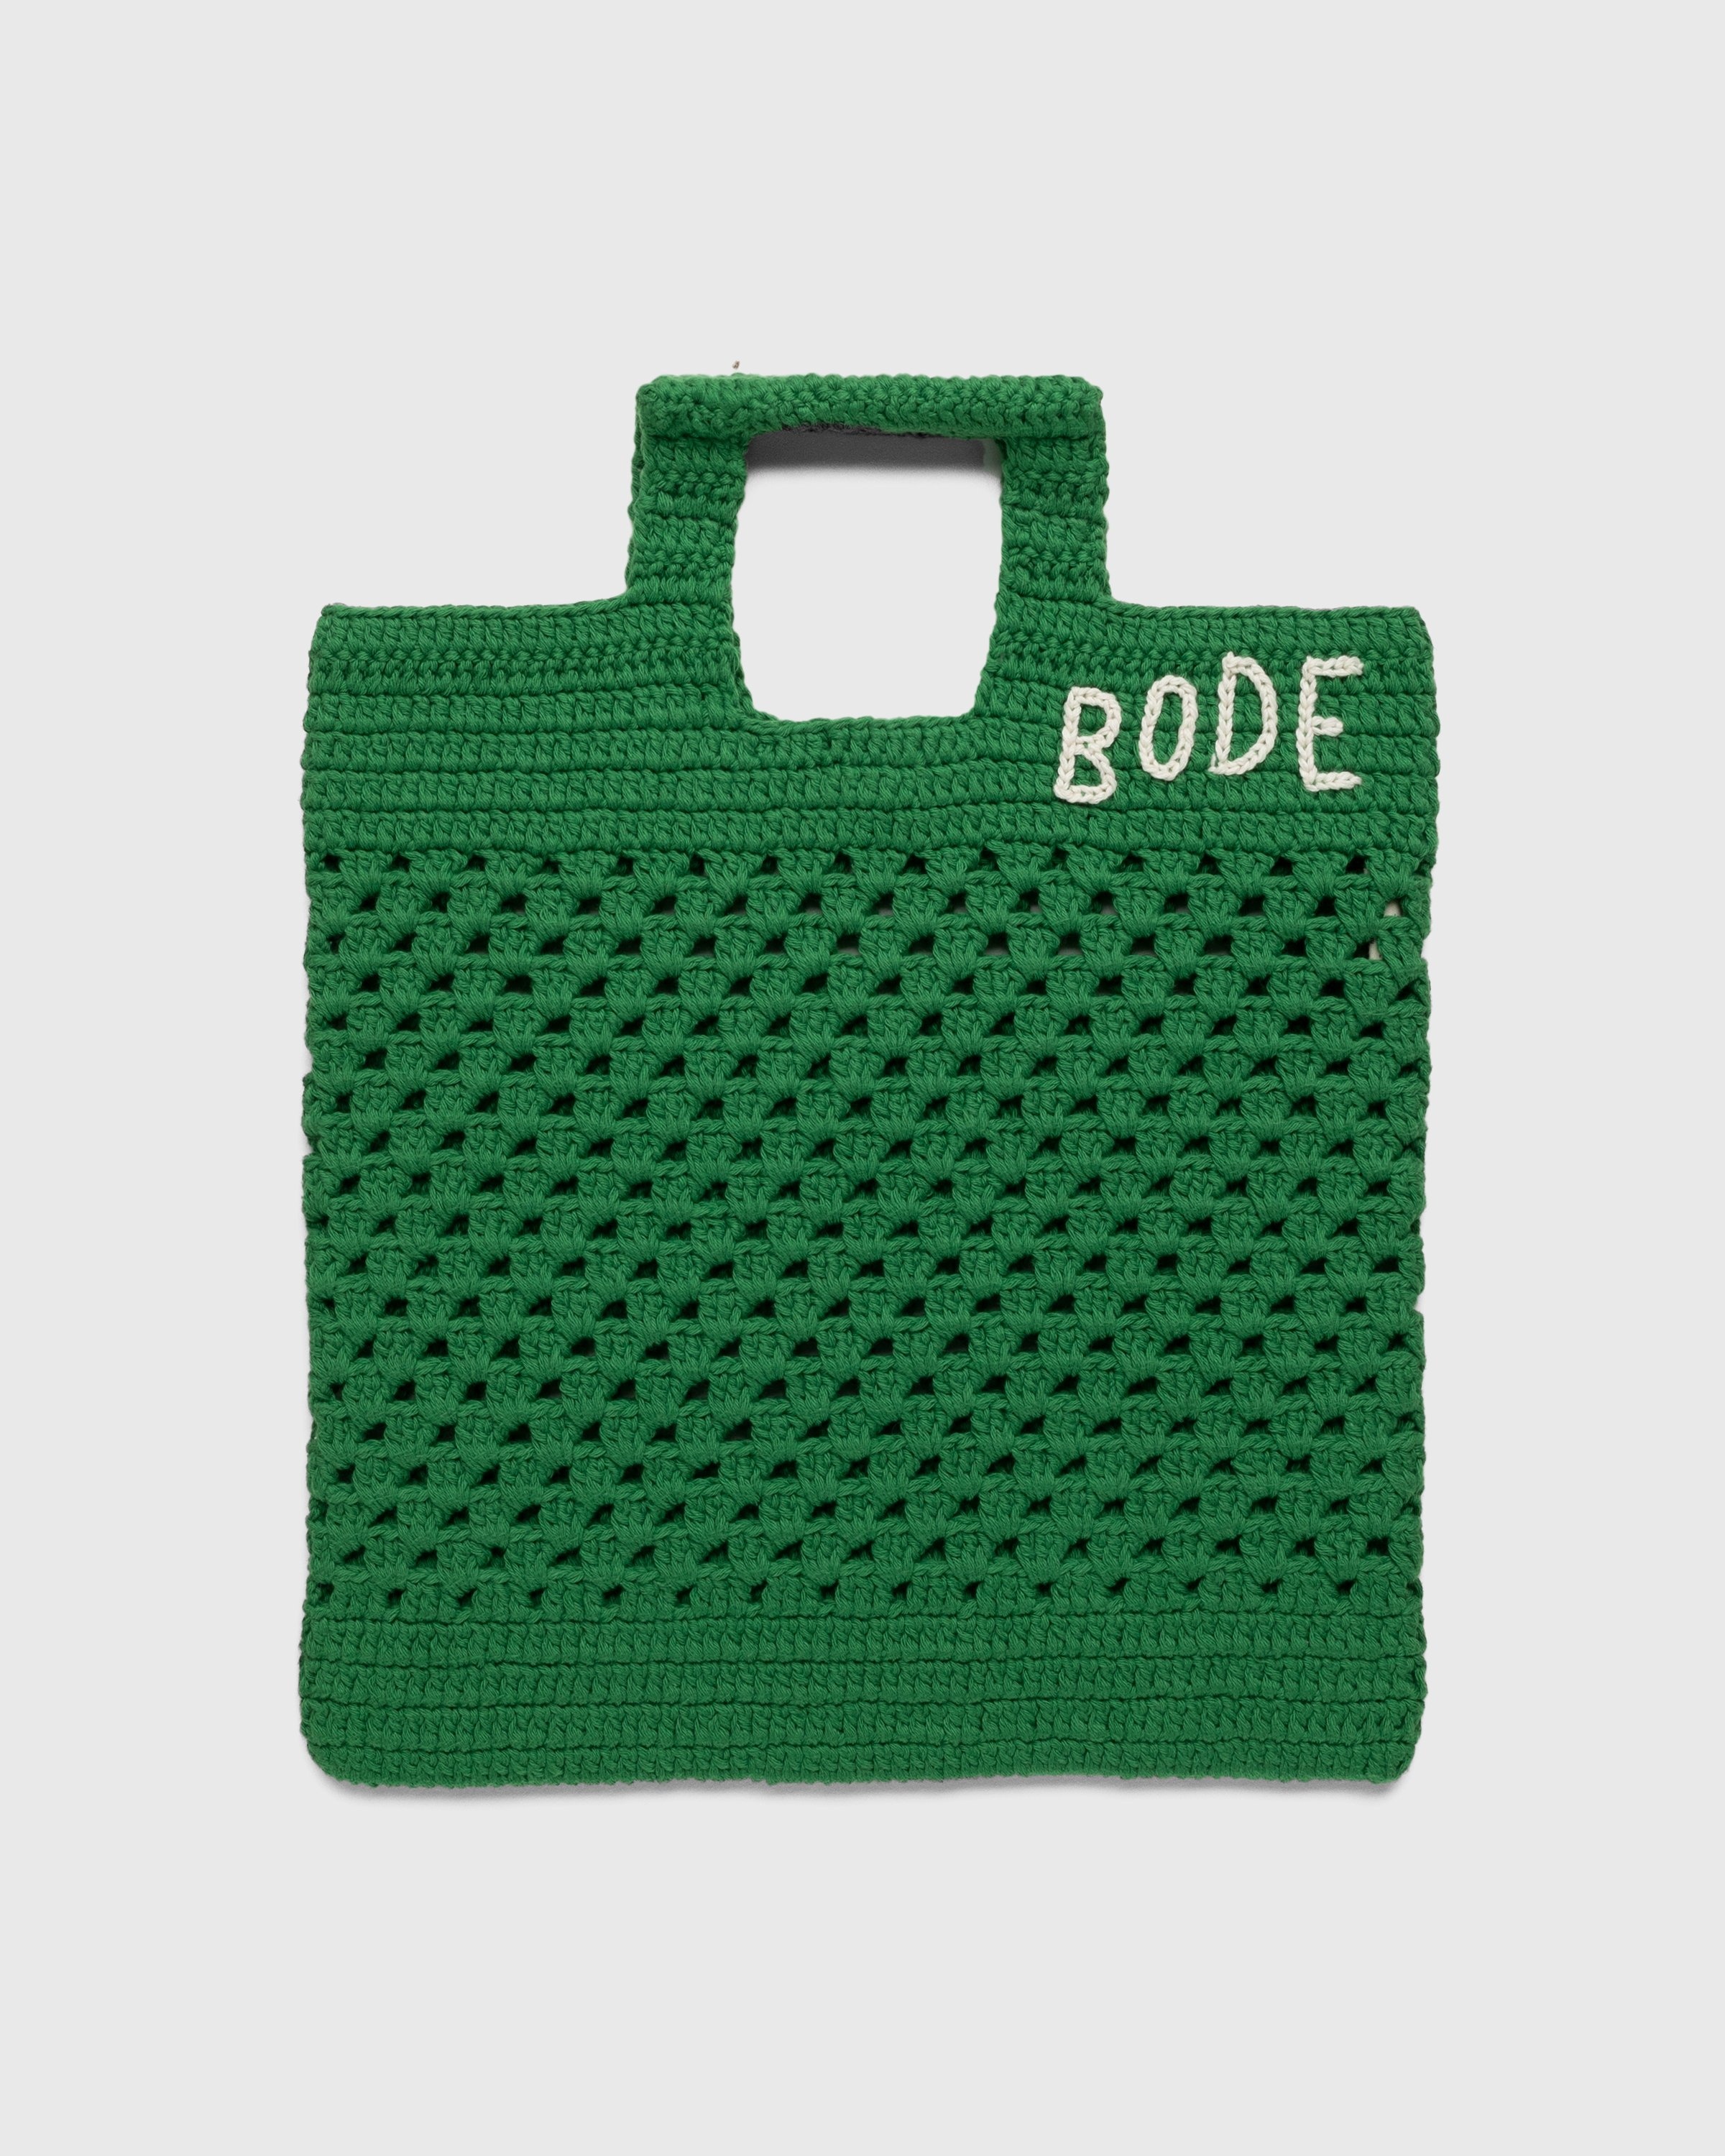 Bode – Crochet Tote Green - Tote Bags - Green - Image 1